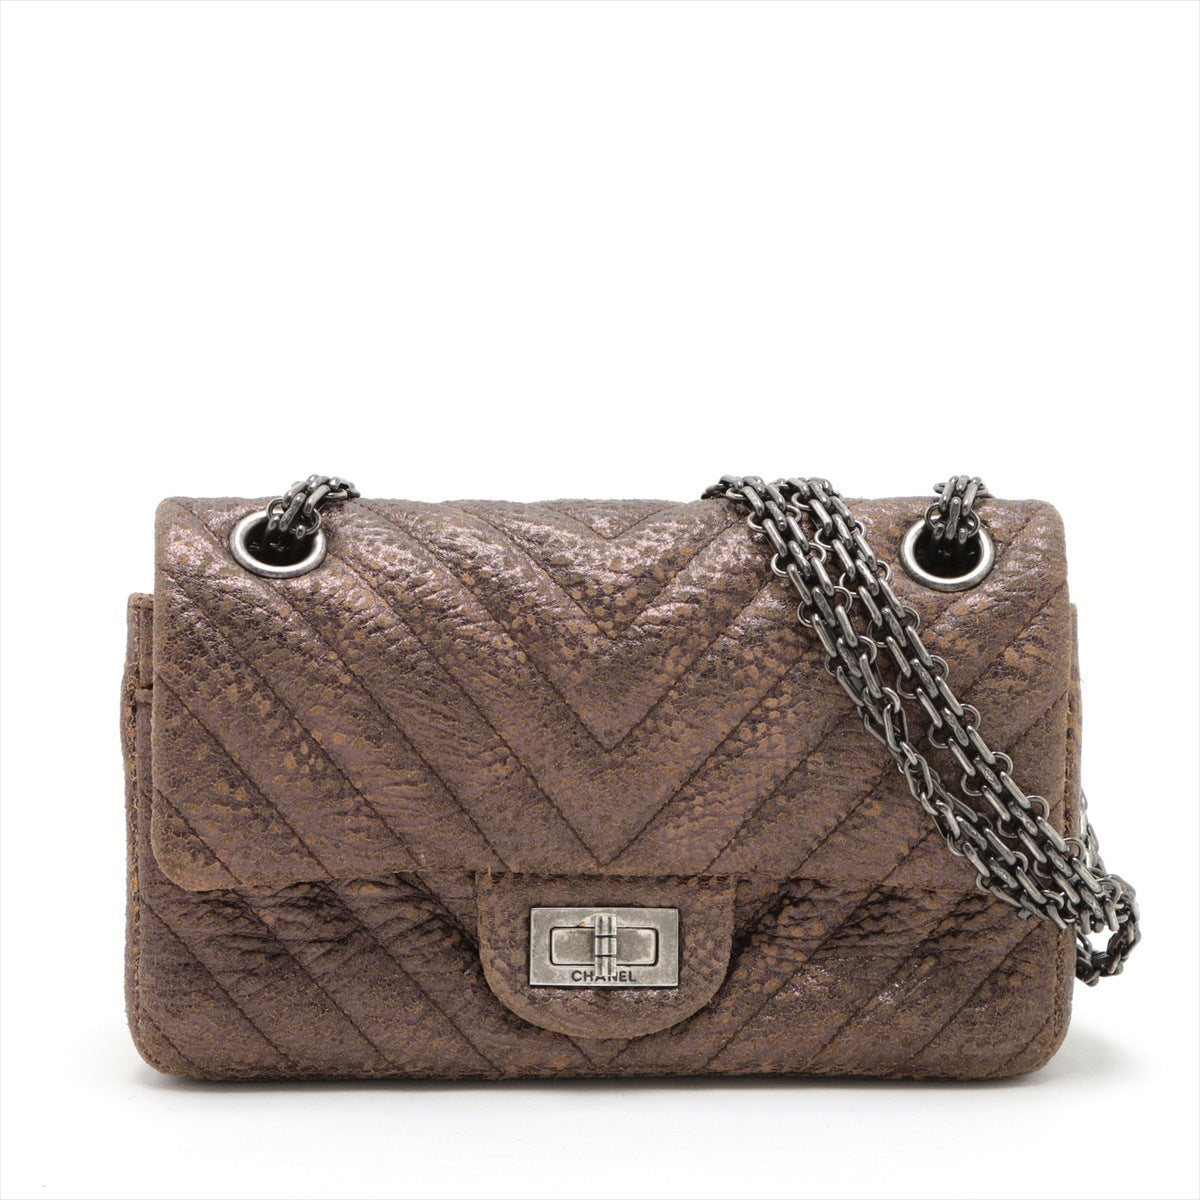 Chanel V Stitch Leather Double flap Double chain bag 2.55 Brown Silver Metal fittings 23XXXXXX